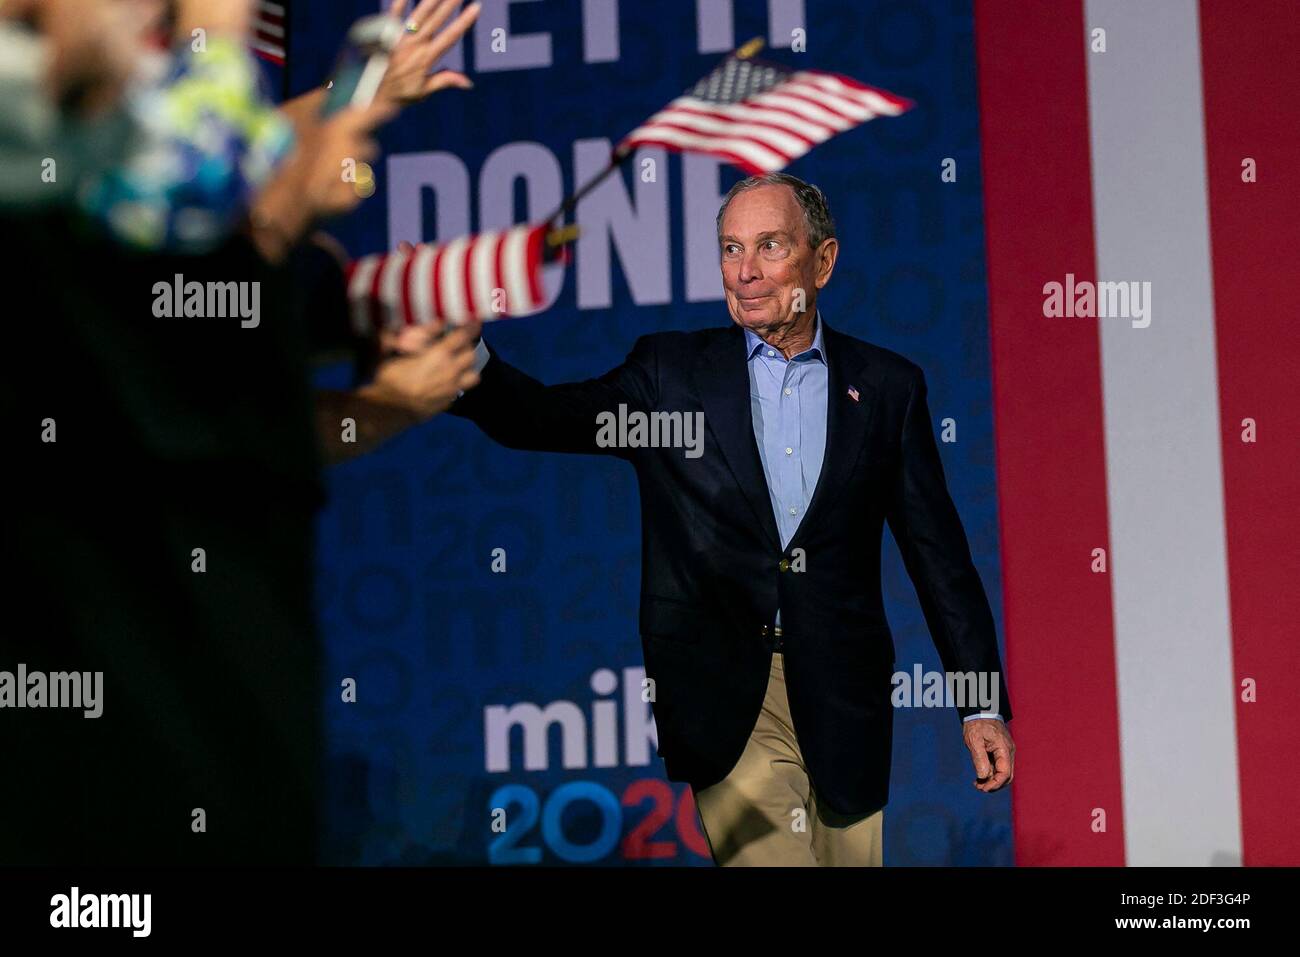 NO FILM, NO VIDEO, NO TV, NO DOCUMENTARY - Democratic presidential candidate Mike Bloomberg waves to supporters as he arrives to his campaign rally at the Palm Beach County Convention Center in West Palm Beach, FL, USA, on Tuesday, March 3, 2020. Photo by Matias J. Ocner/Miami Herald/TNS/ABACAPRESS.COM Stock Photo